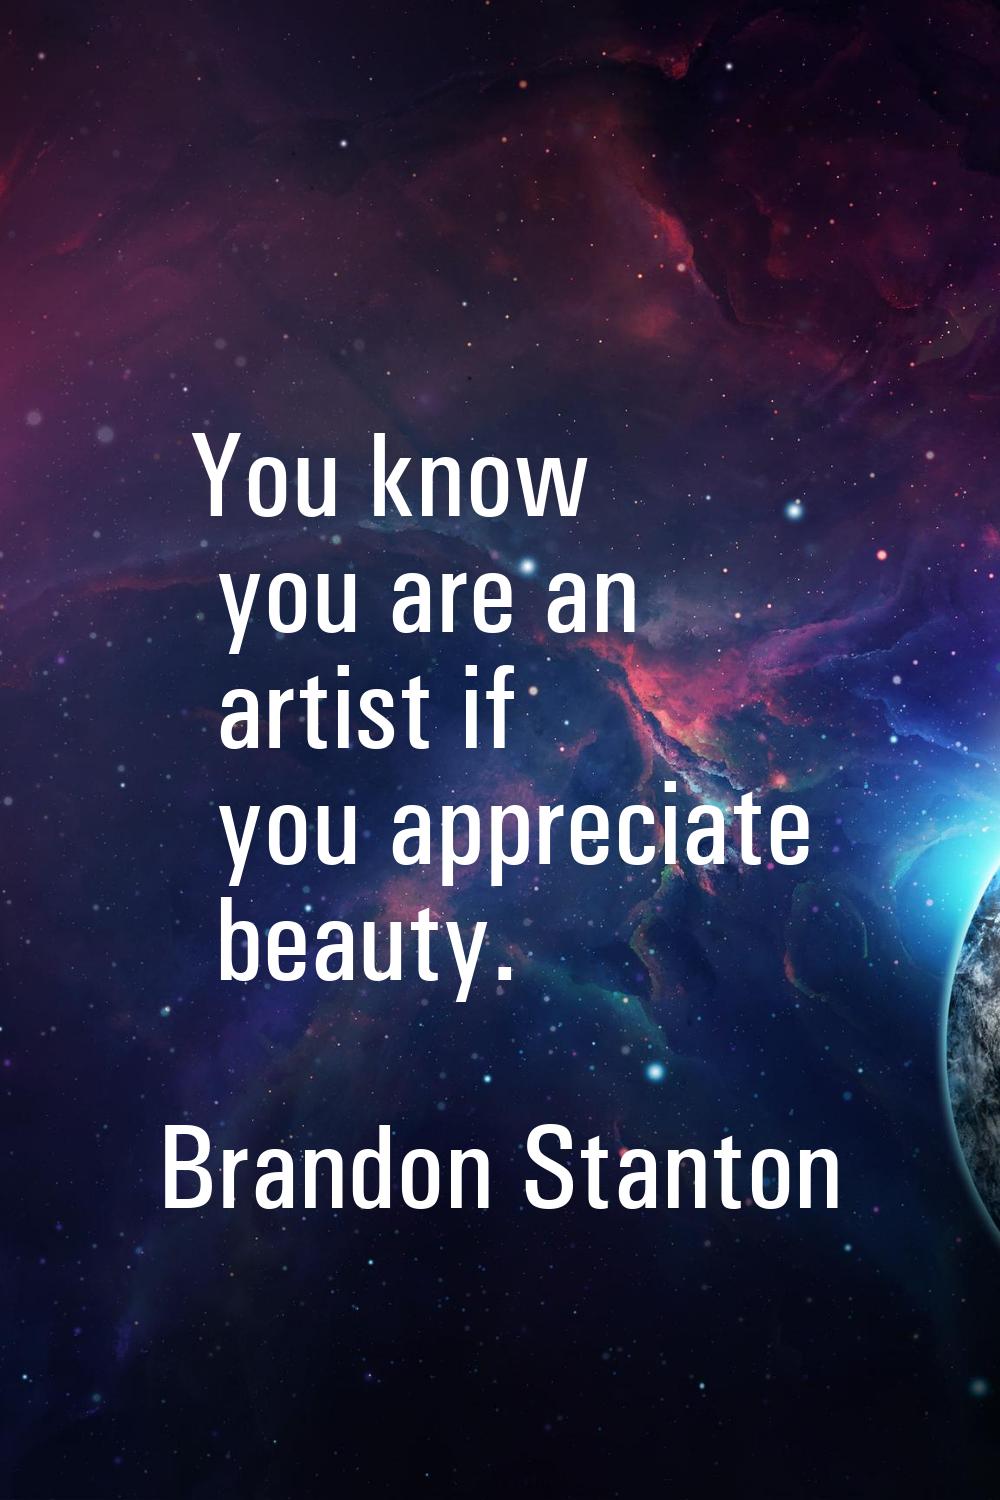 You know you are an artist if you appreciate beauty.